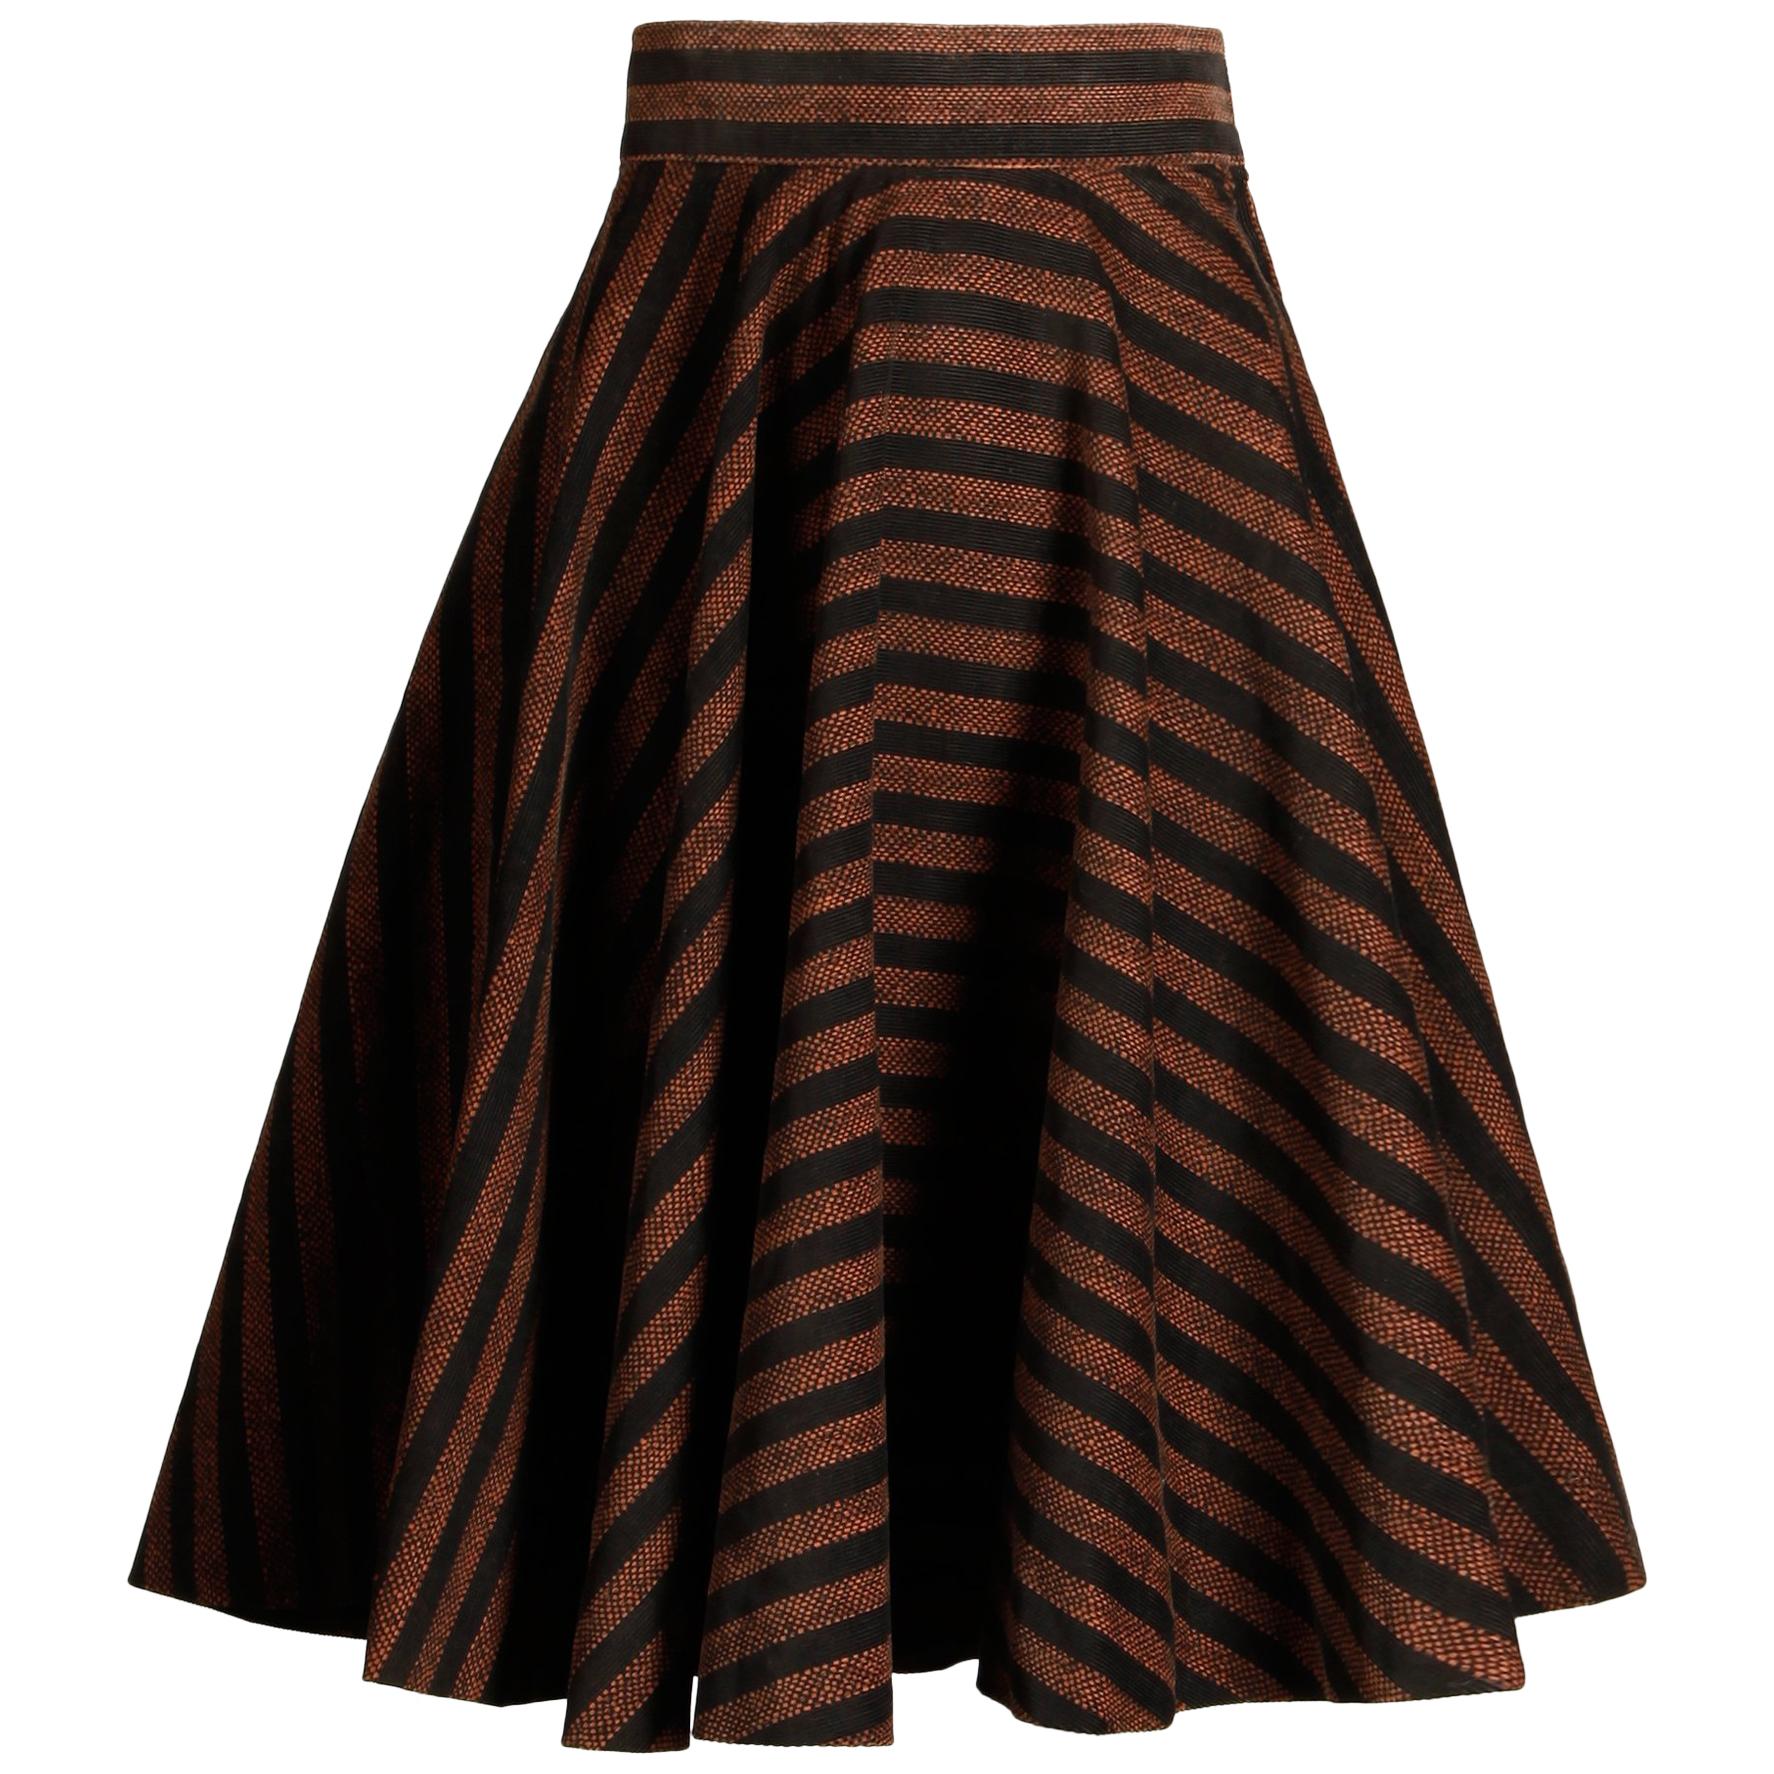 1950s Brown + Black Striped Circle Skirt with a Full Sweep